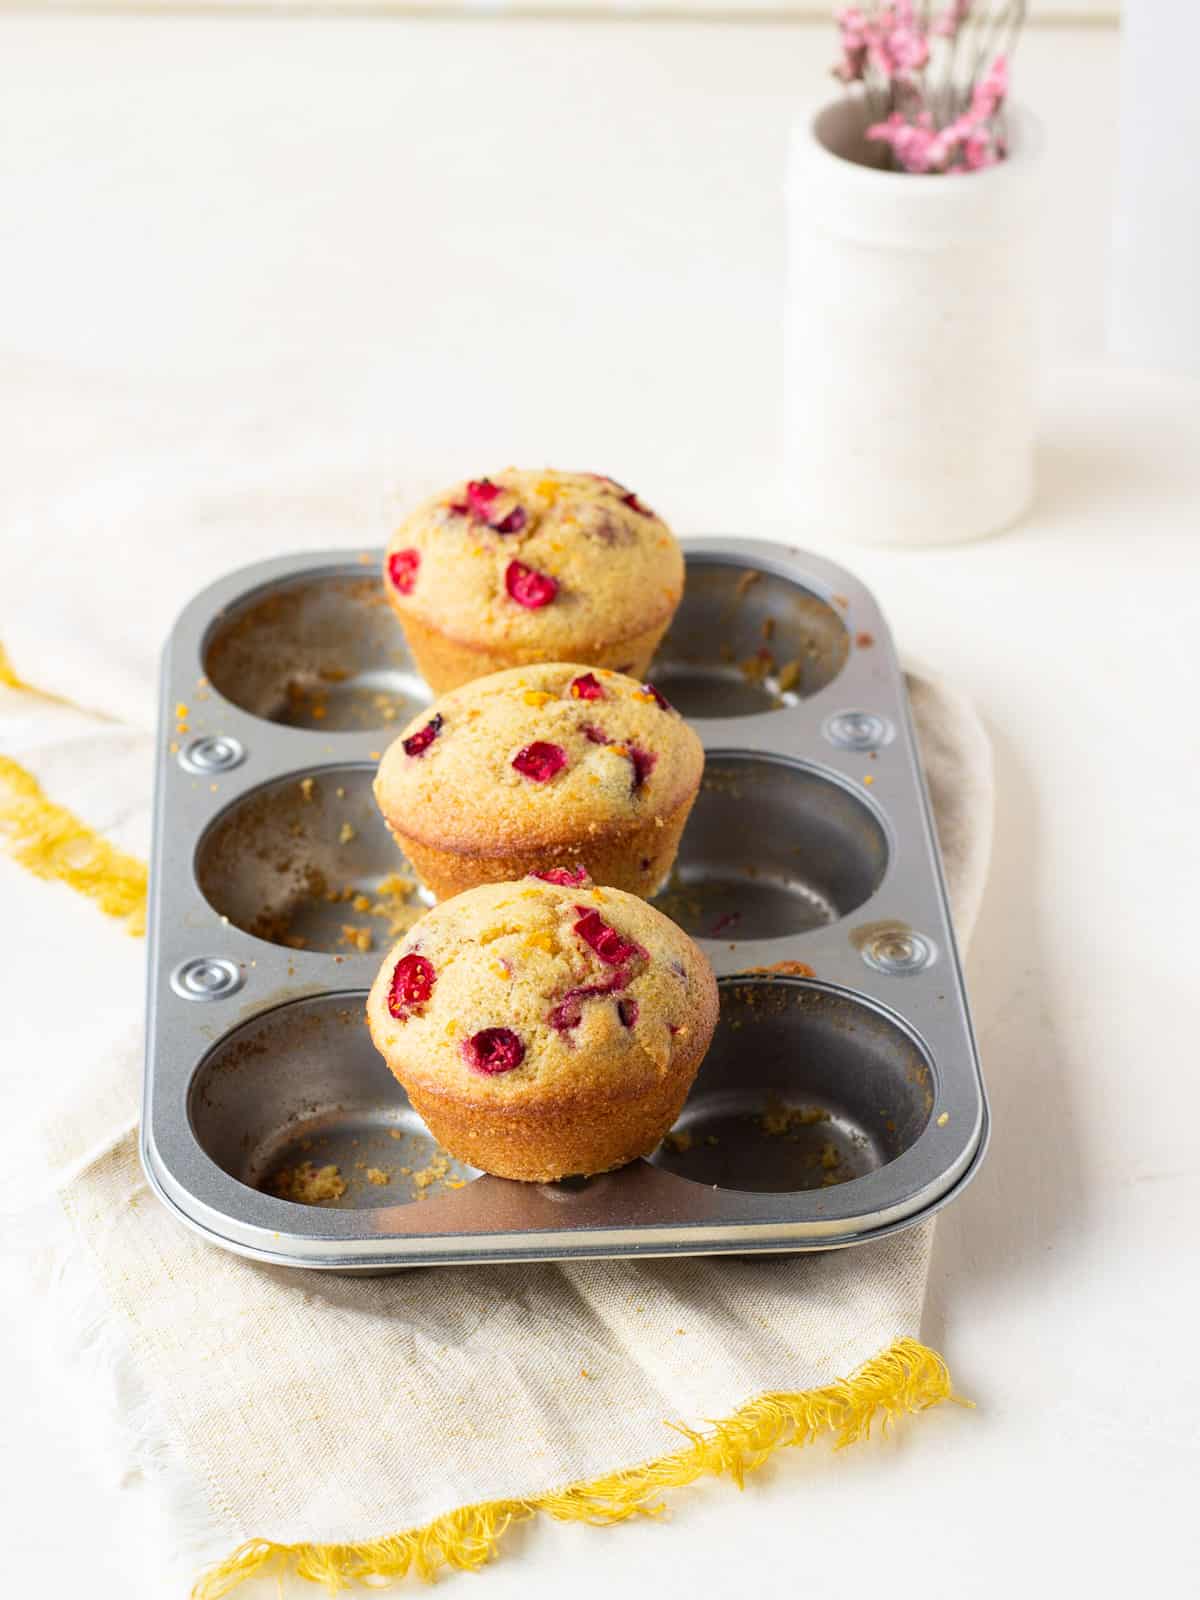 Three cranberry orange muffins setting on top of a muffin tin in the center.